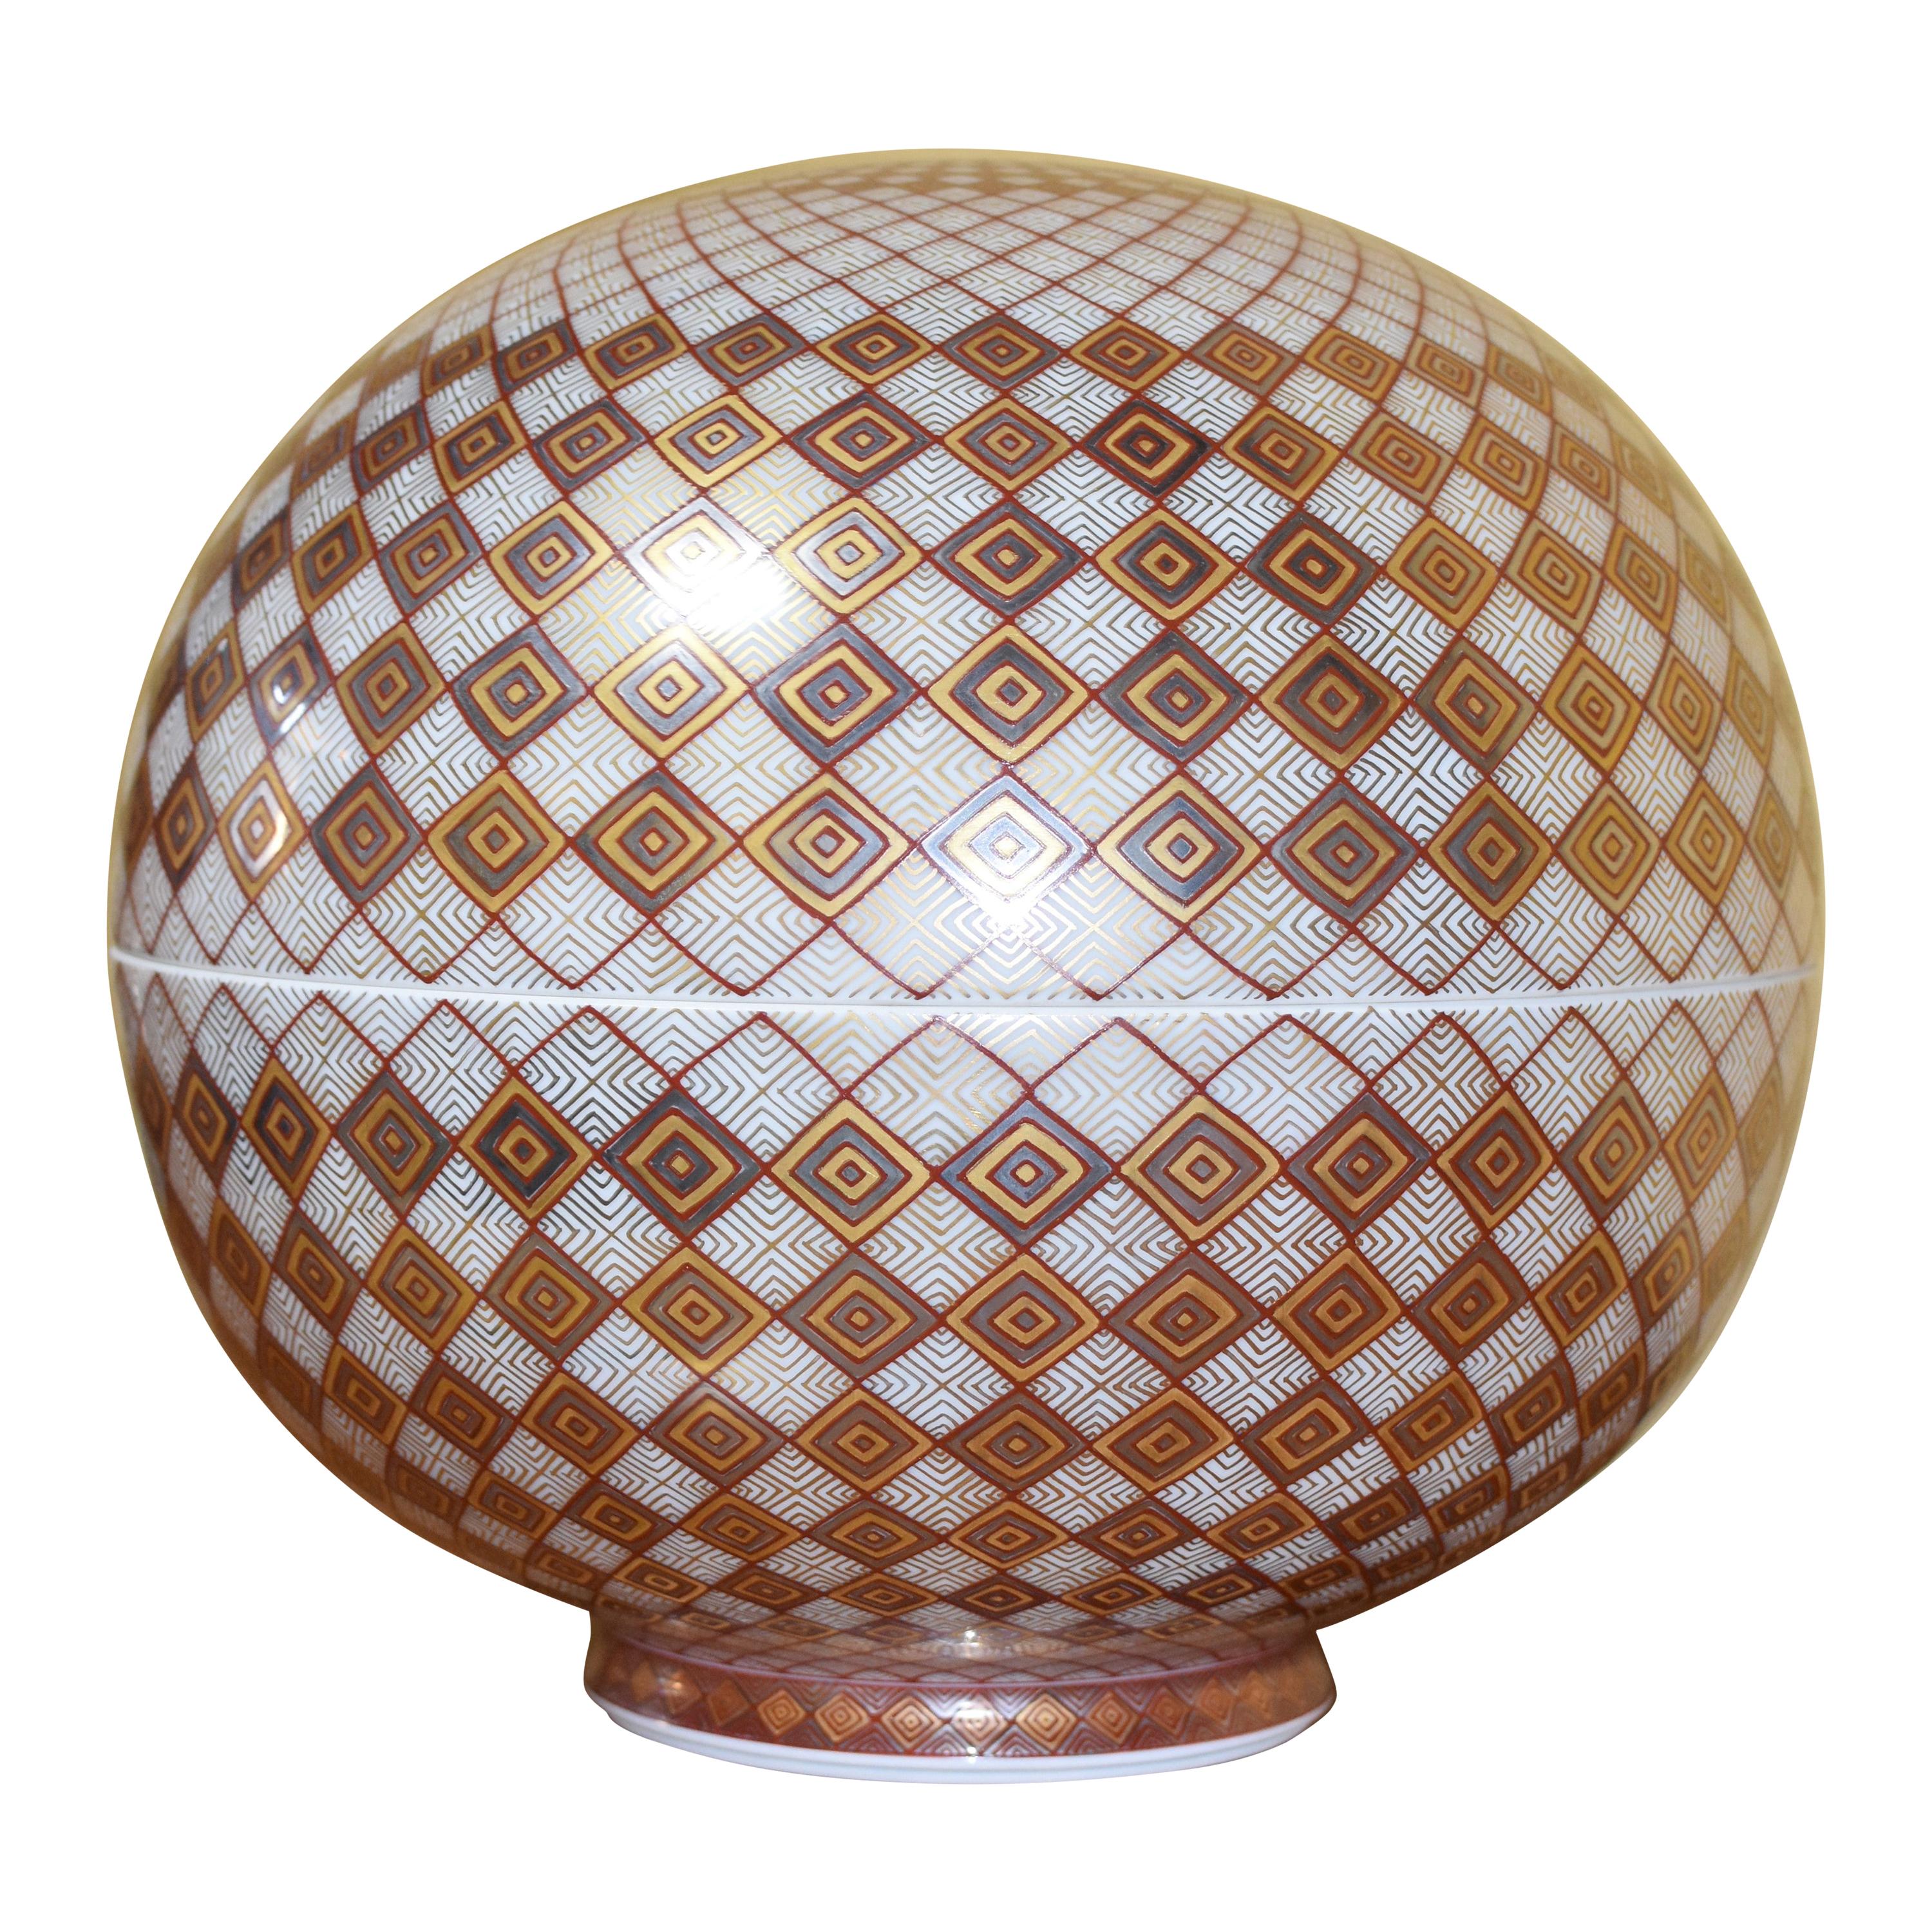 Extraordinary Japanese contemporary decorative porcelain box, extremely intricately hand-painted in cream and red and gilded in platinum and gold, on an exquisite globular body in cream, featuring an extremely intricate geometric progression